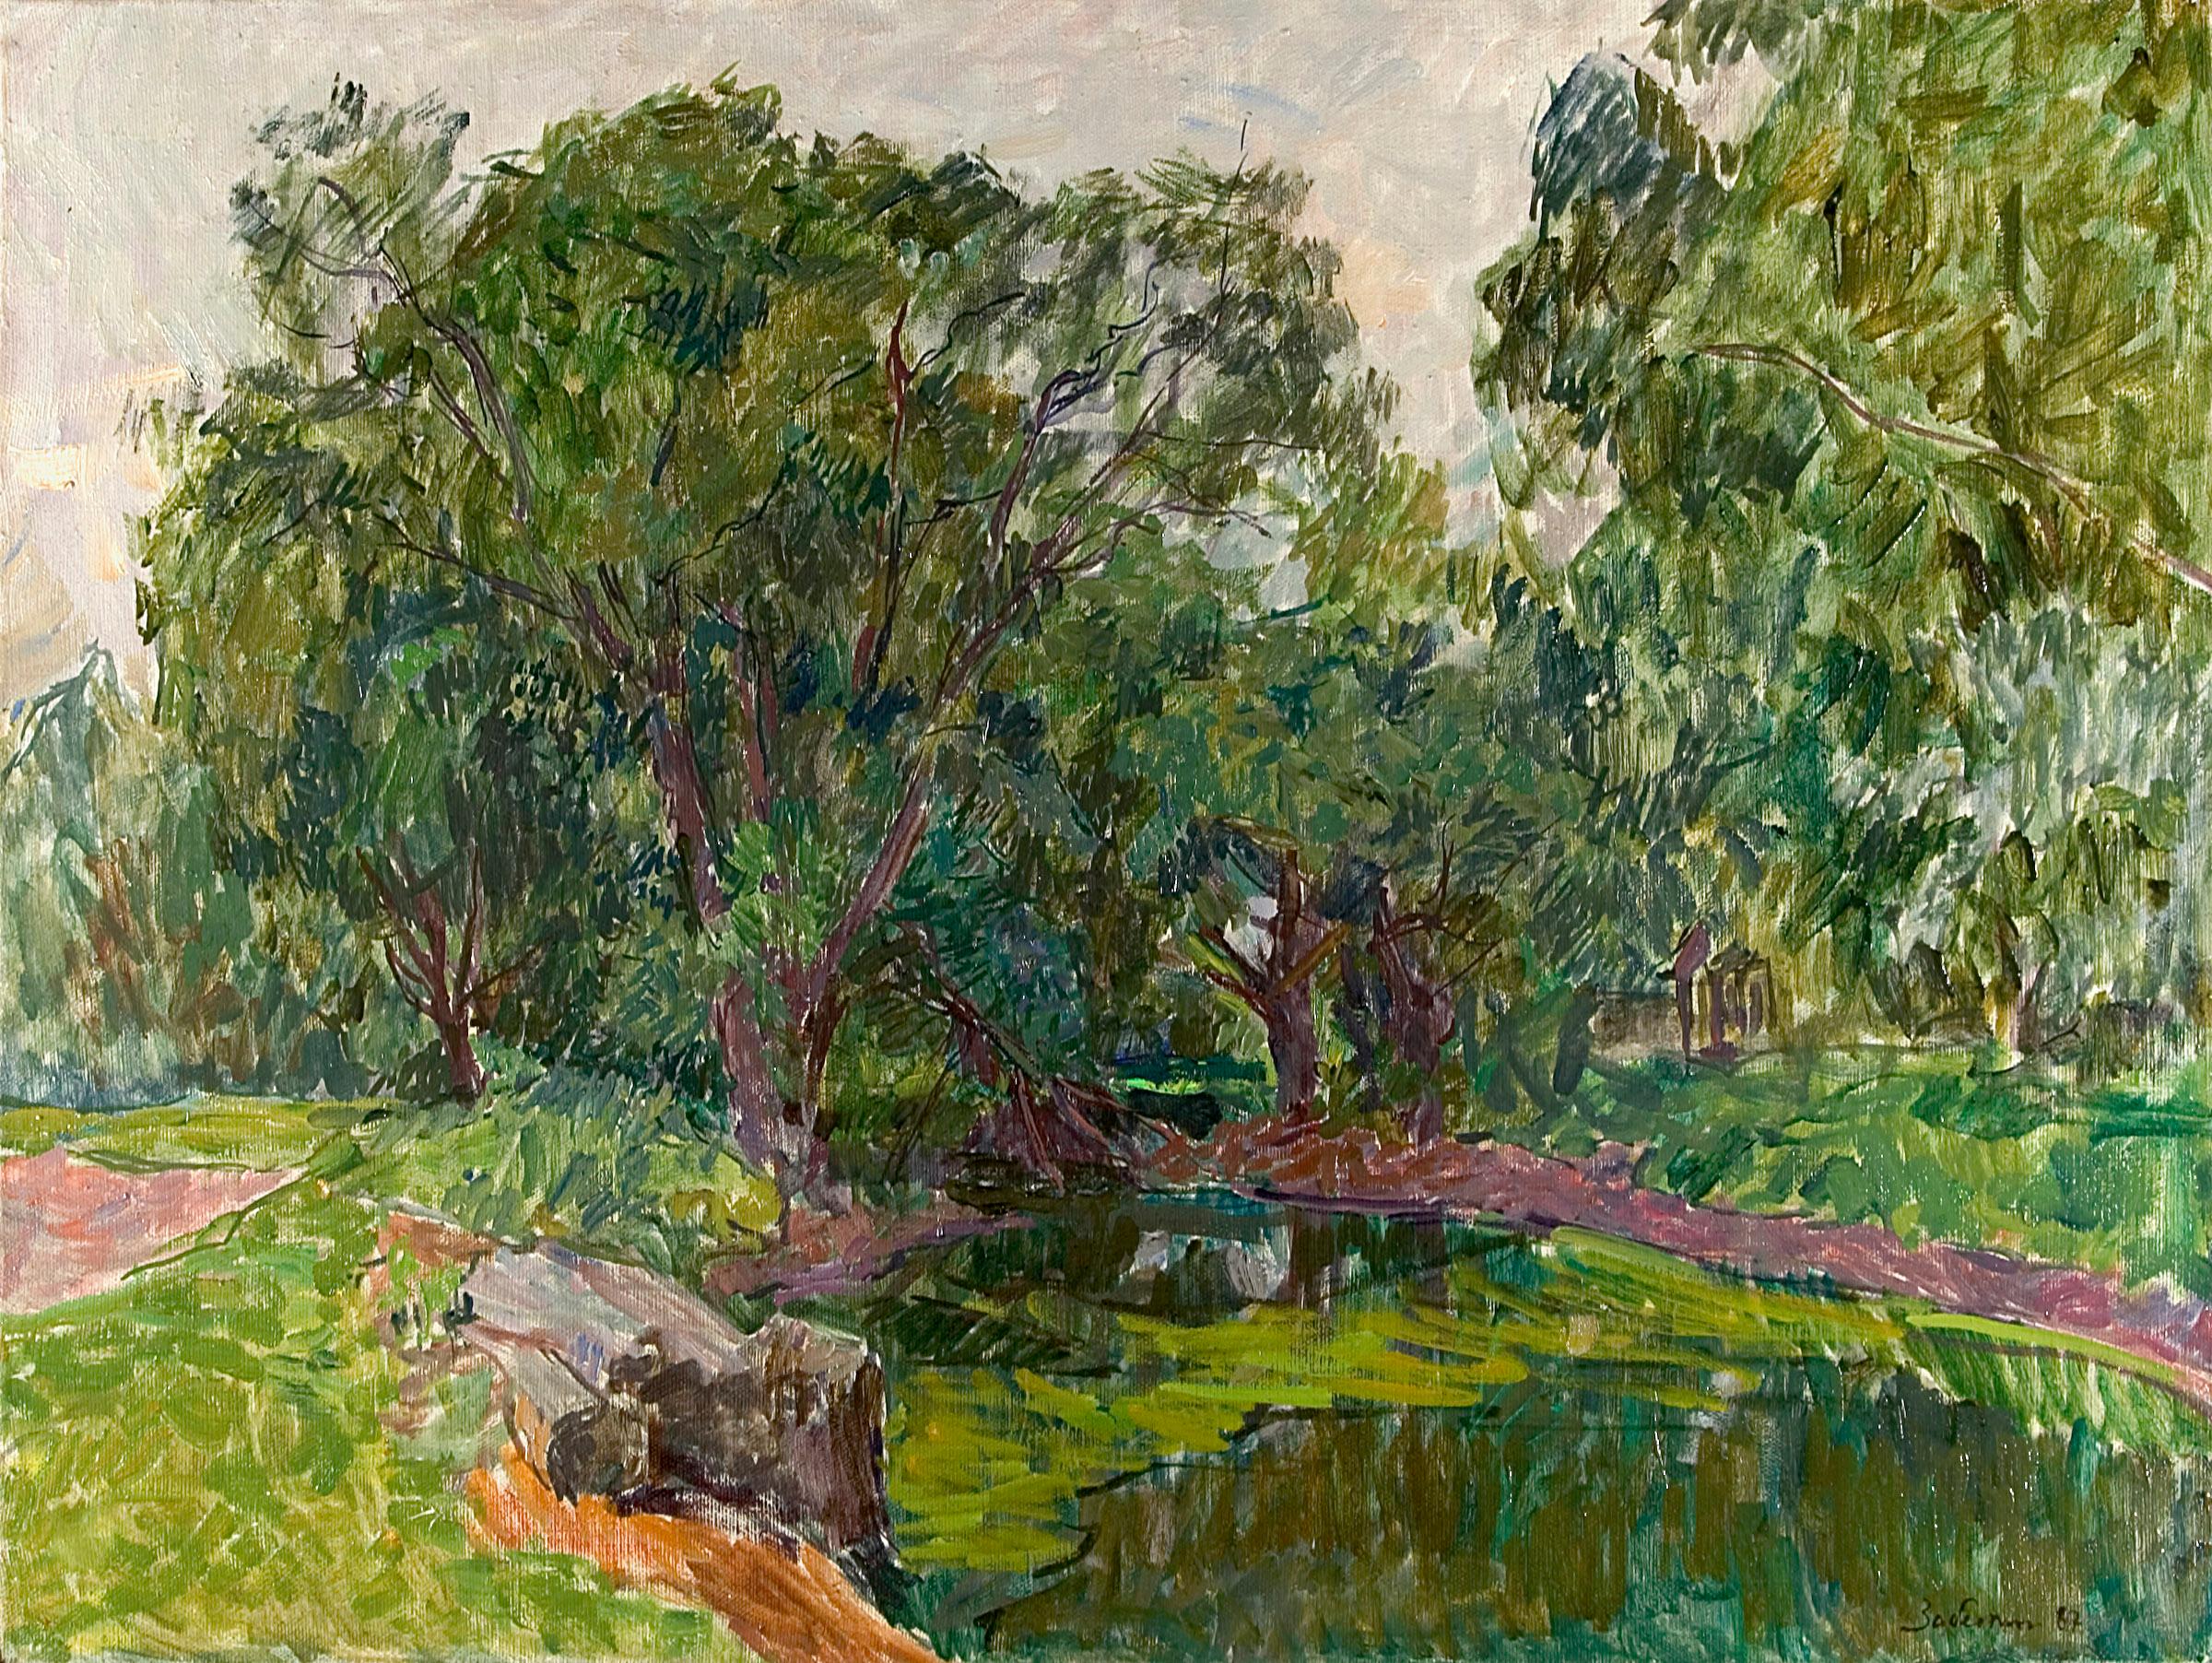 Vyacheslav Zabelin (1935- 2001) Considered a living master during his lifetime in Moscow, painted Pond covered by vegetation in 1987. Zabelin had already 300 paintings in museum collections throughout the world at the time of his death. A Surikov